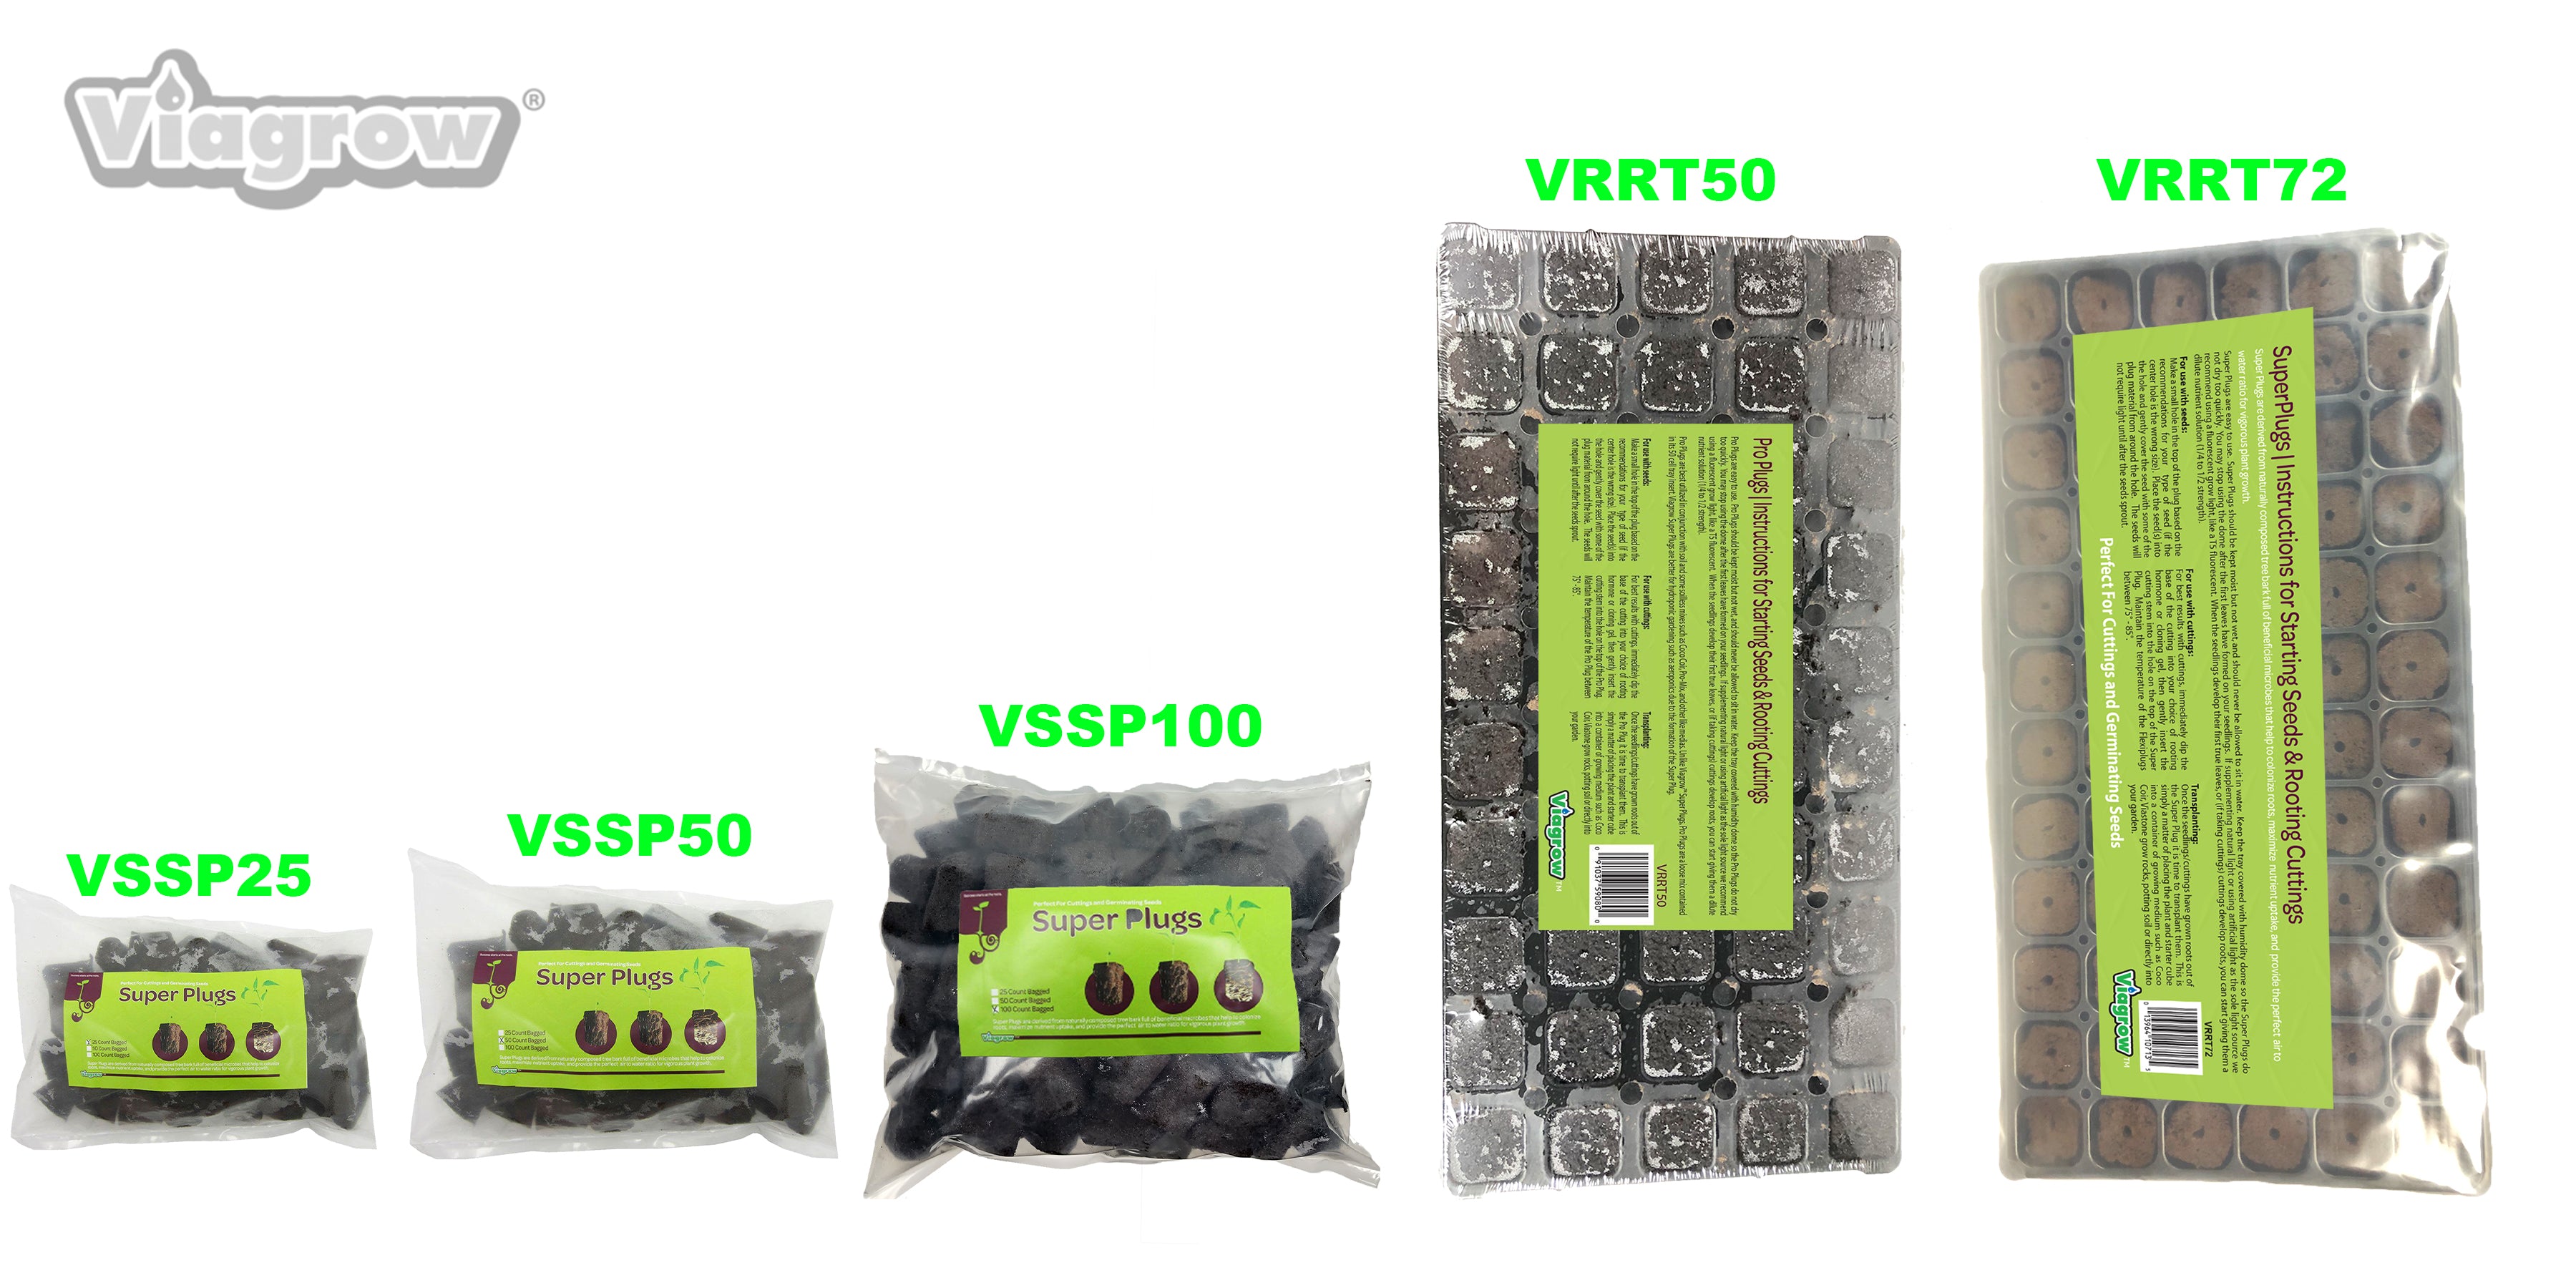 Viagrow 50 Site Pro Plugs with Tray, Insert and Tall Dome